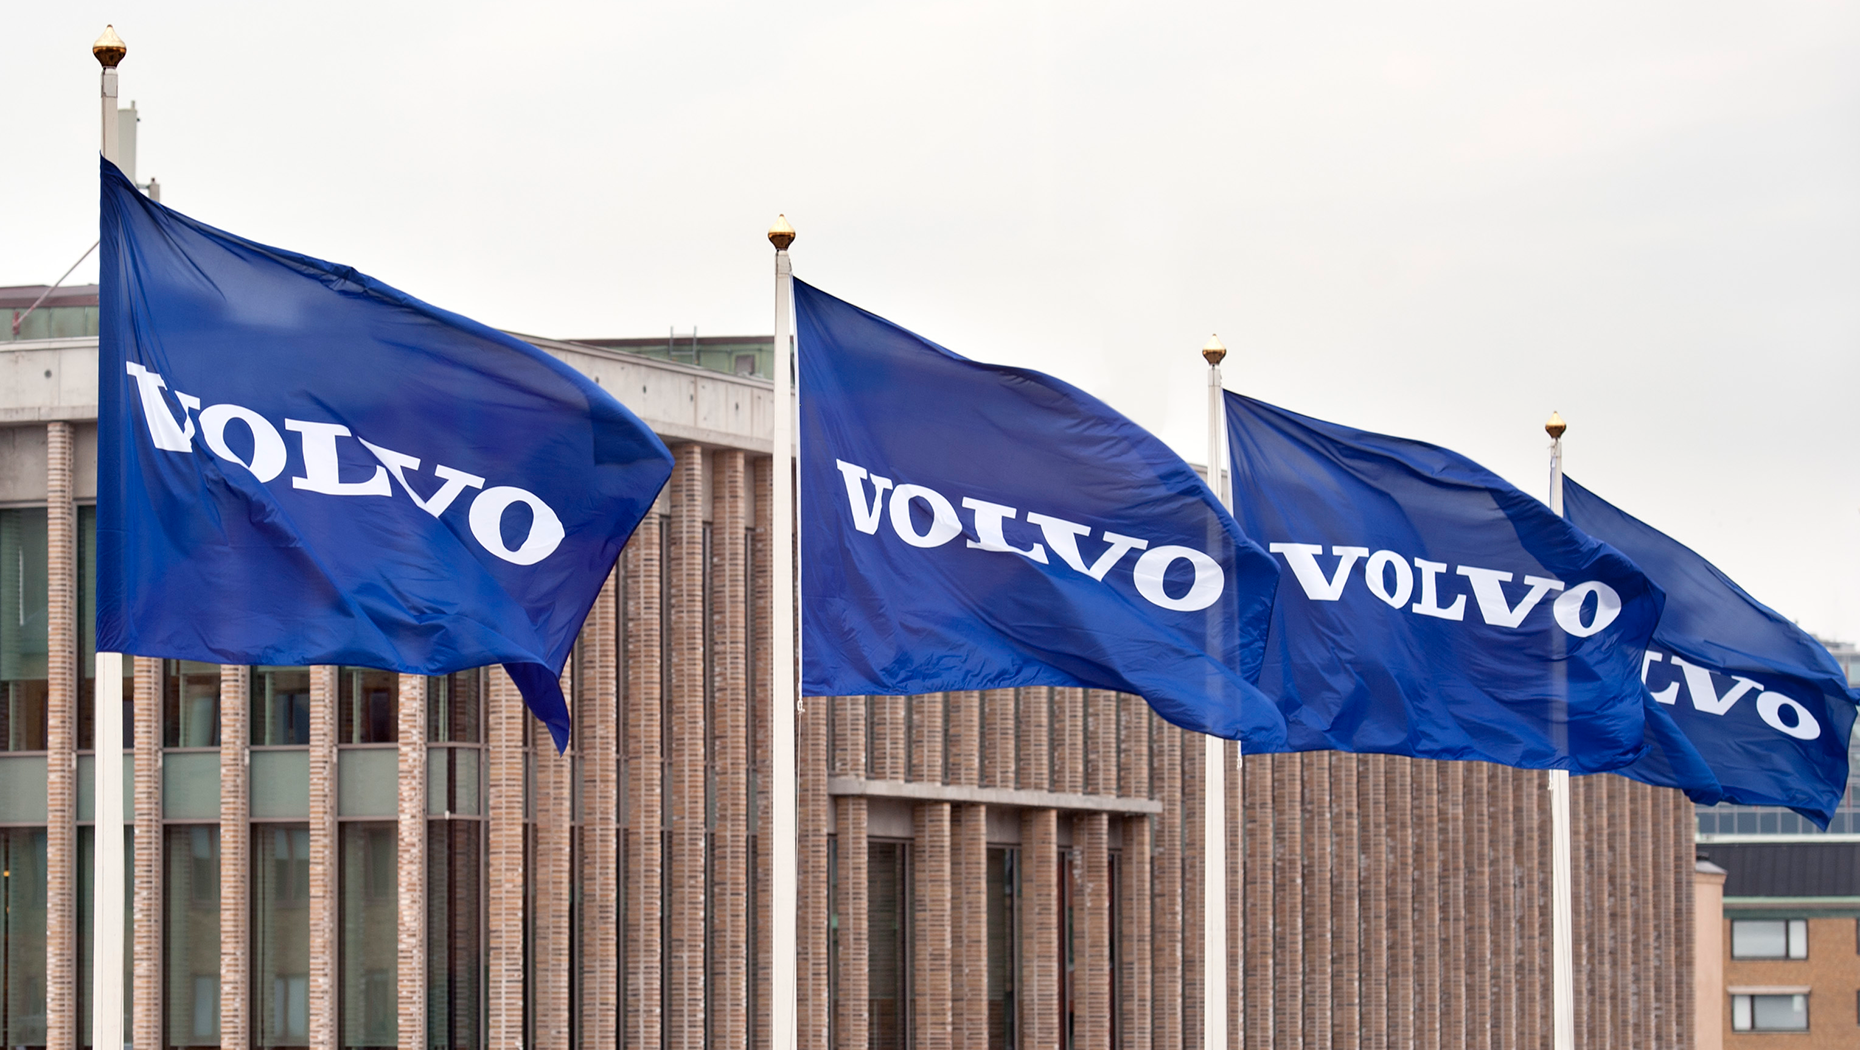 With this acquisition, Volvo Group will complement its battery-electric road map